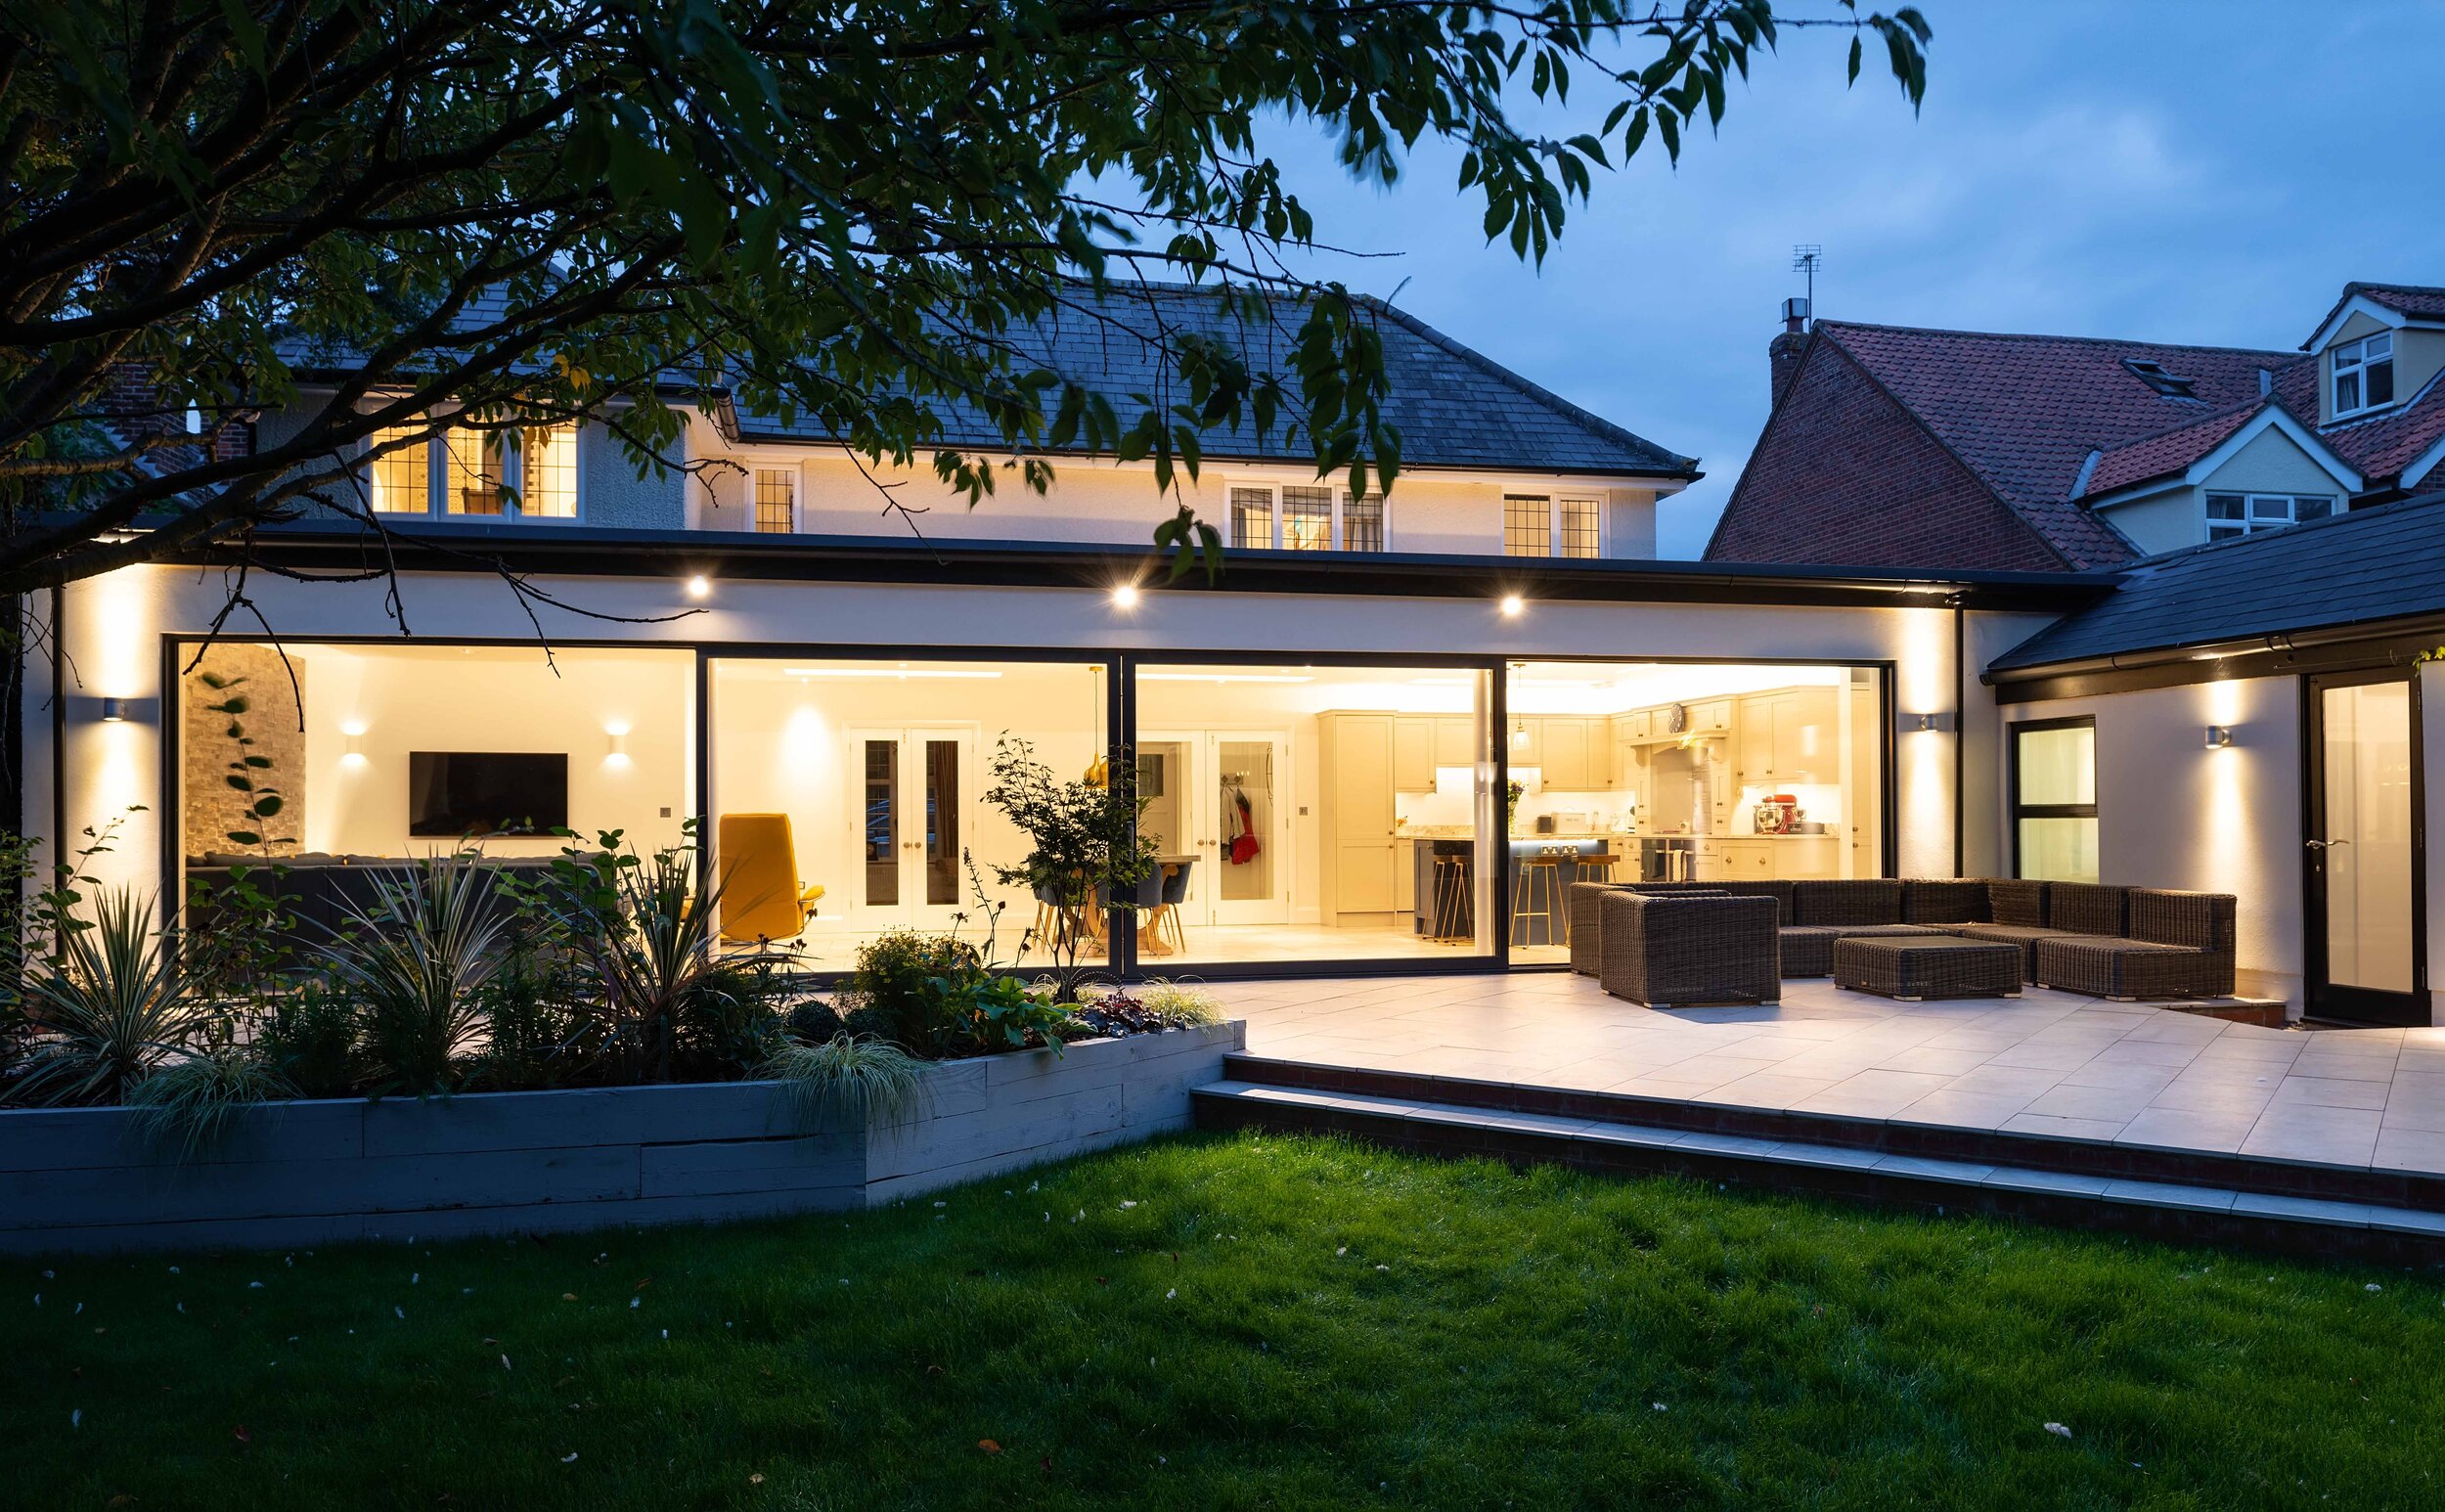  An RIBA chartered architects' practice based in Cambridge, working throughout East Anglia and London     We design contemporary new builds, extensions and renovations   Turn your aspirations into reality:    Land or building development appraisal  …